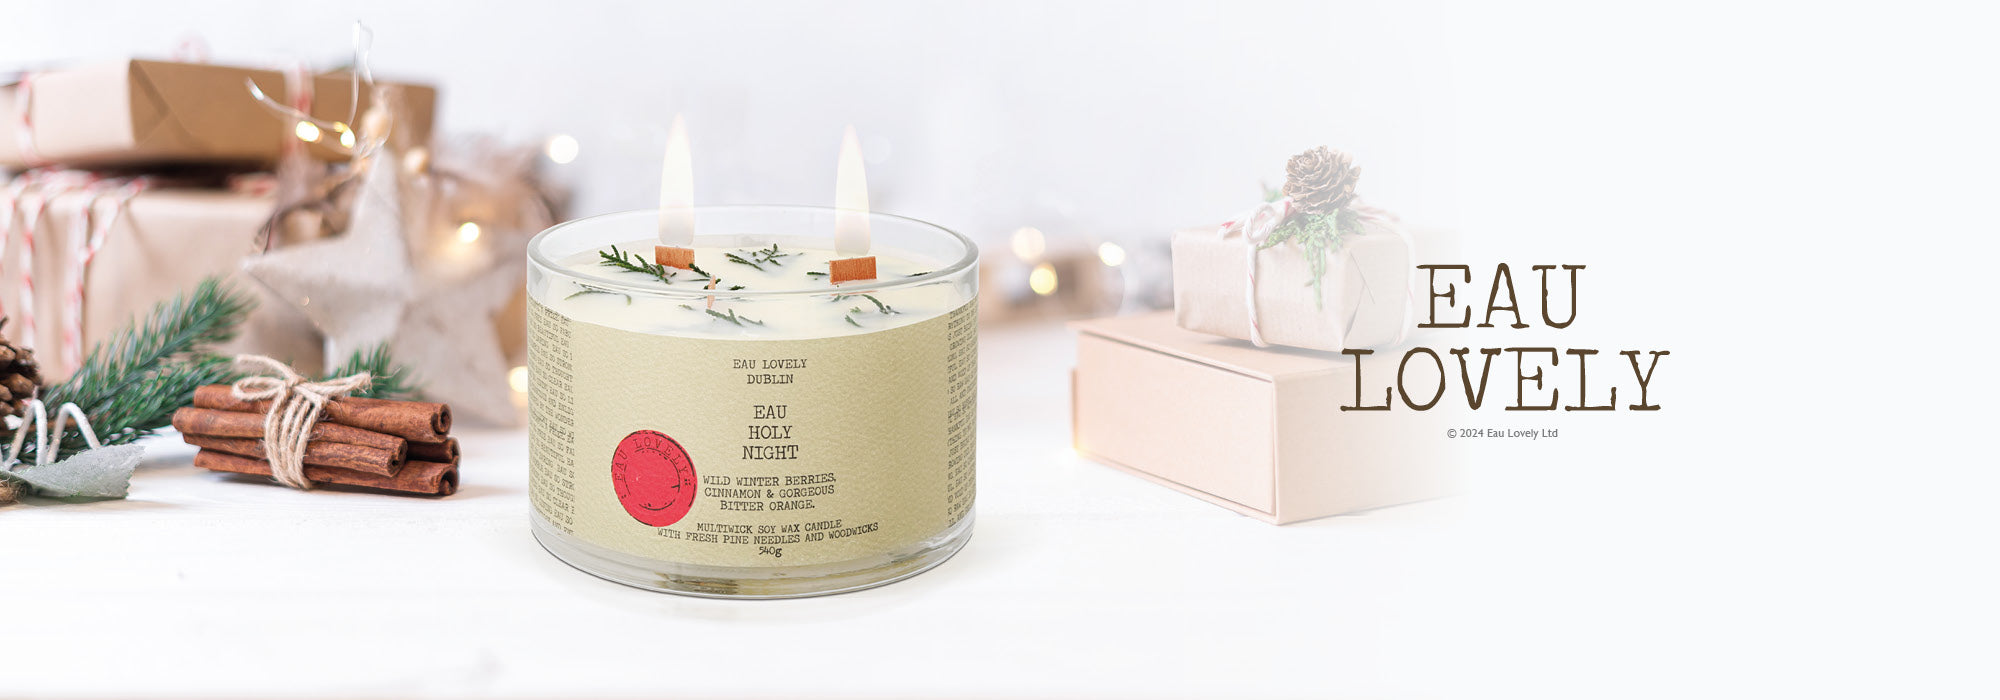 Eau Lovely Candles and Diffusers | Enesco Gift Shop